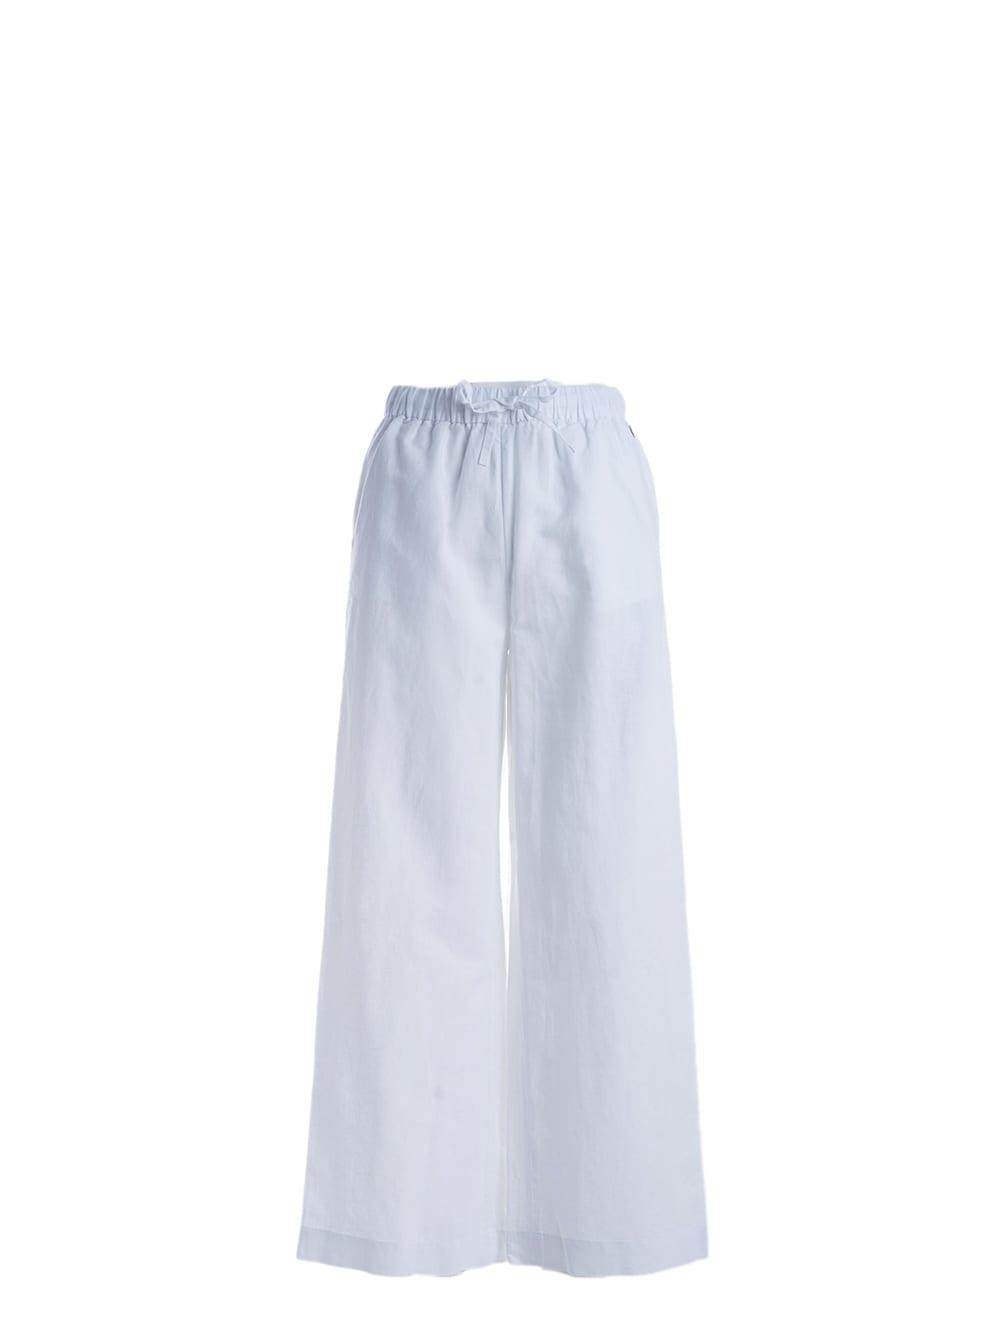 Sun 68 Sun68 Linen And Cotton Pants in White | Lyst